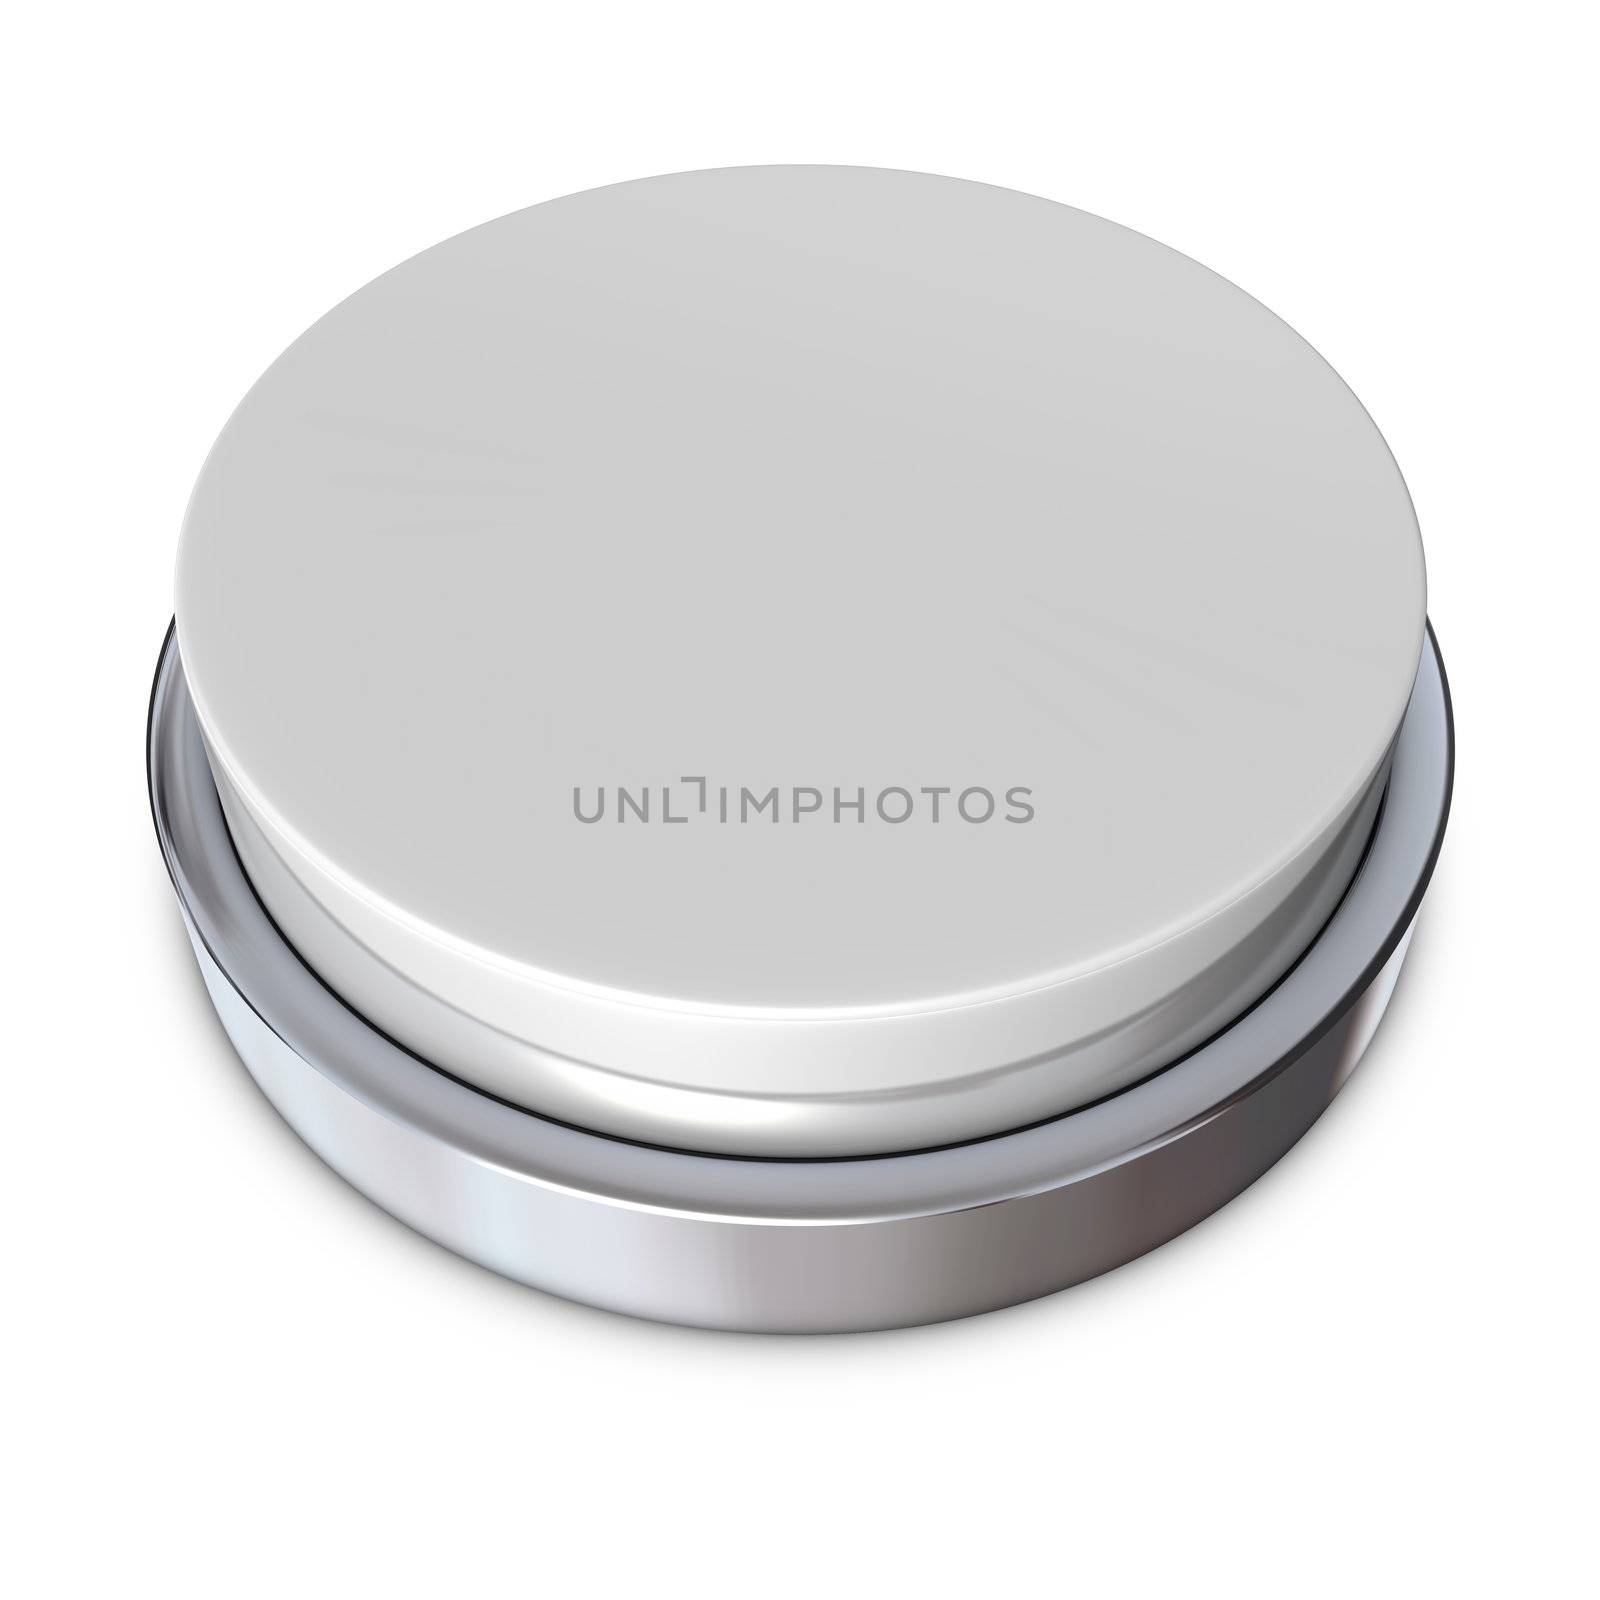 light grey round push button bordered by a metallic ring - design template